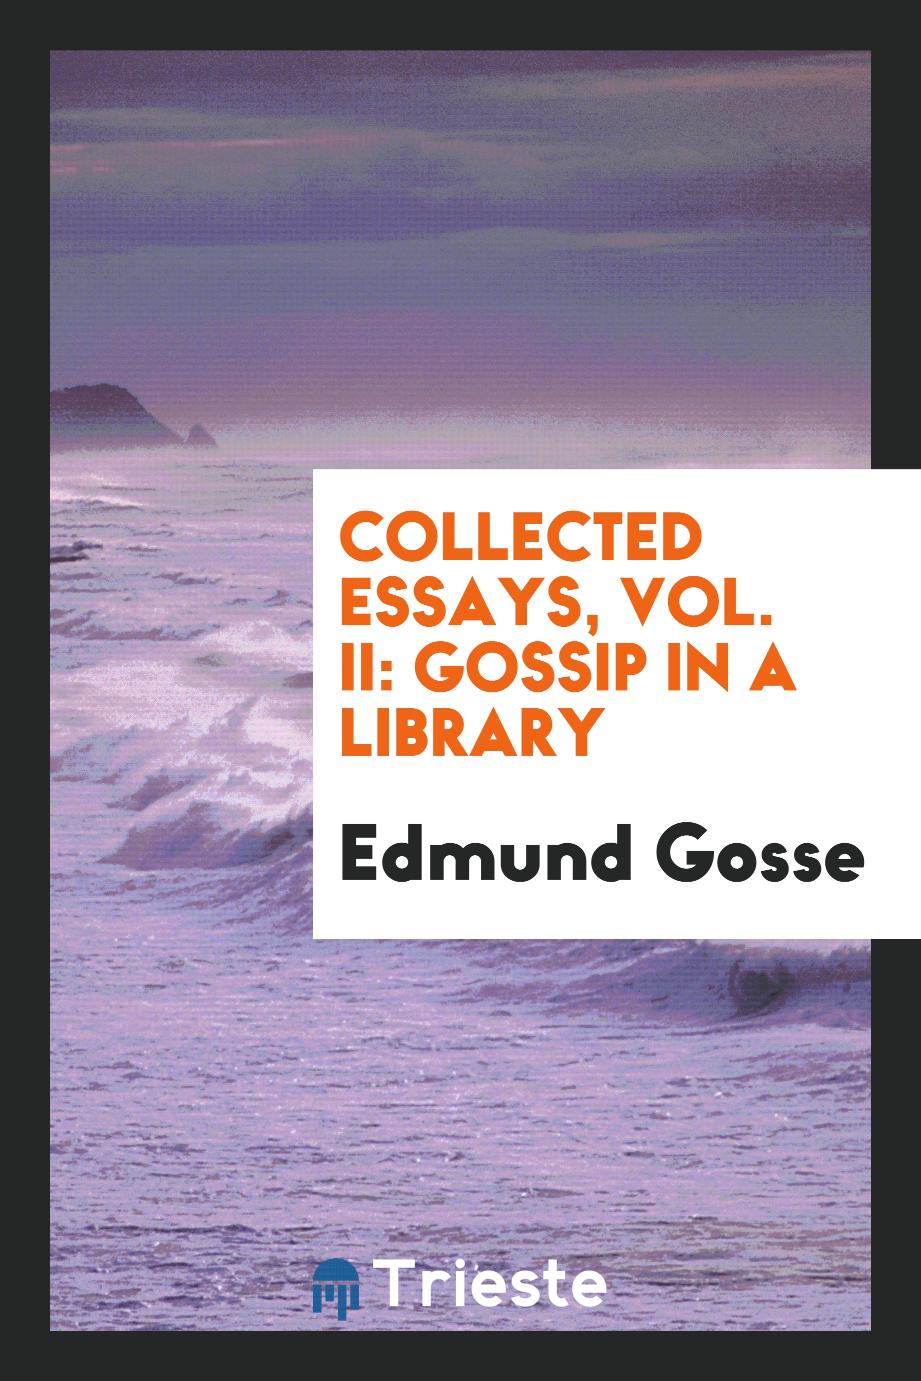 Collected essays, Vol. II: Gossip in a library